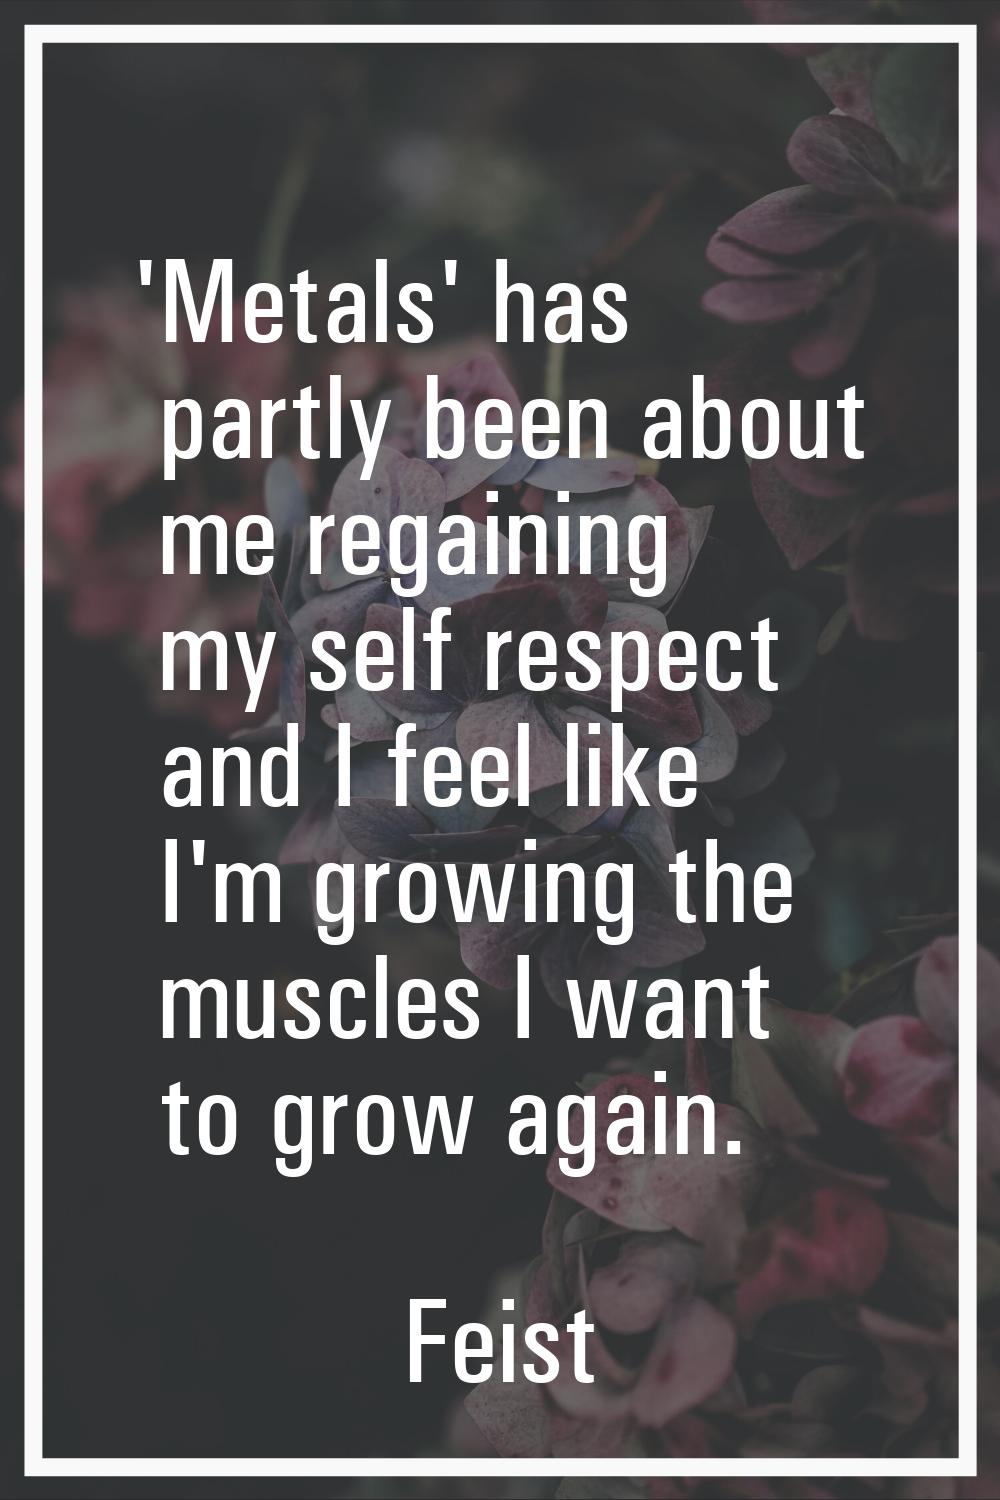 'Metals' has partly been about me regaining my self respect and I feel like I'm growing the muscles